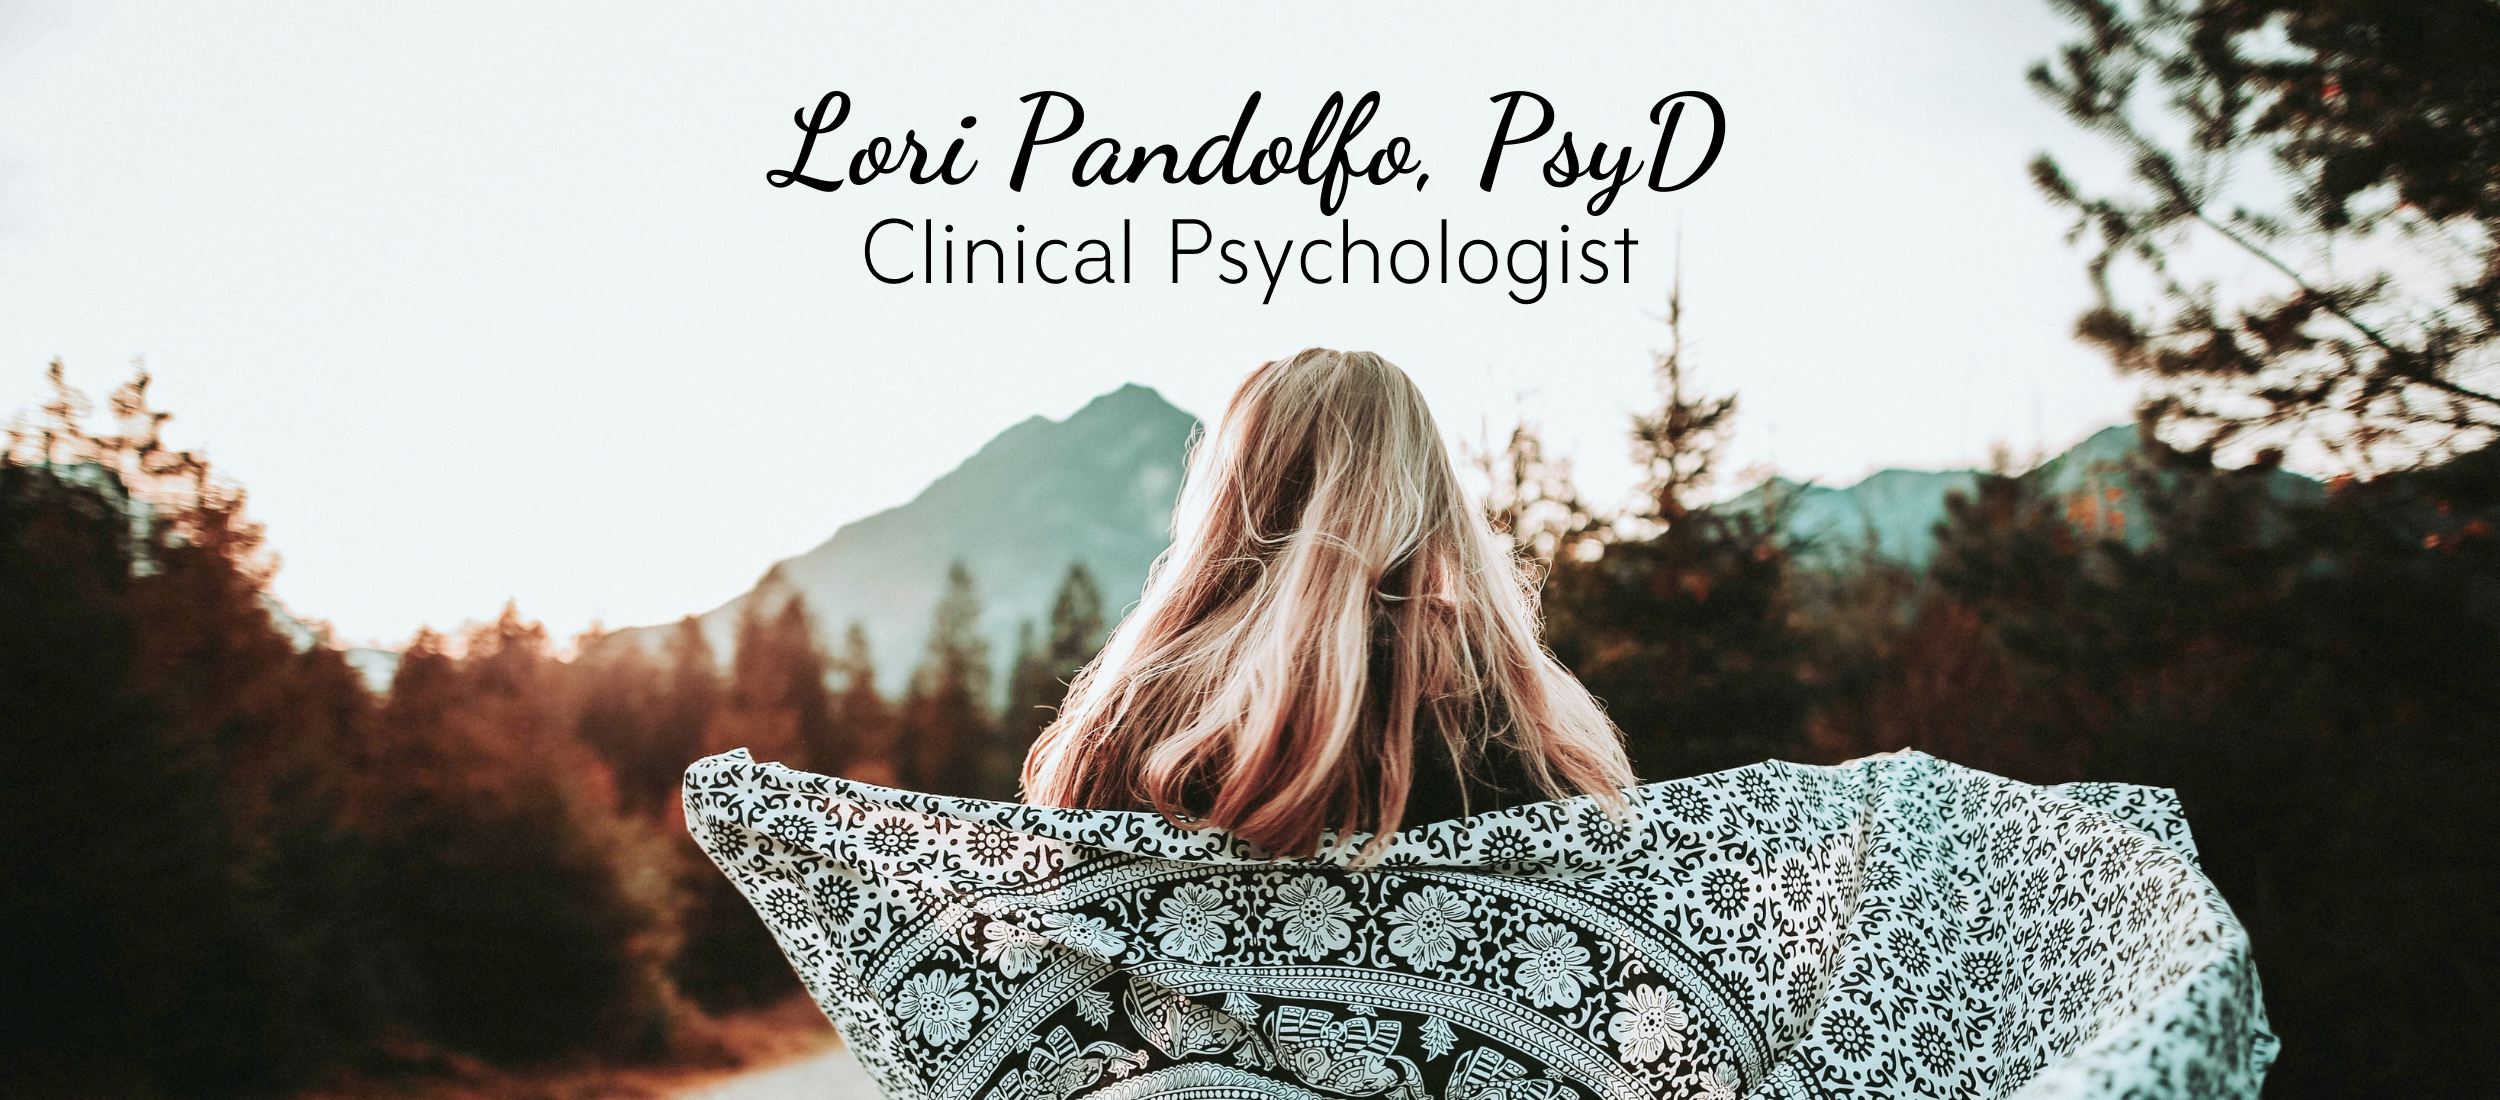 Header image that reads: Lori Pandolfo, Psy.D. Clinical Psychologist.